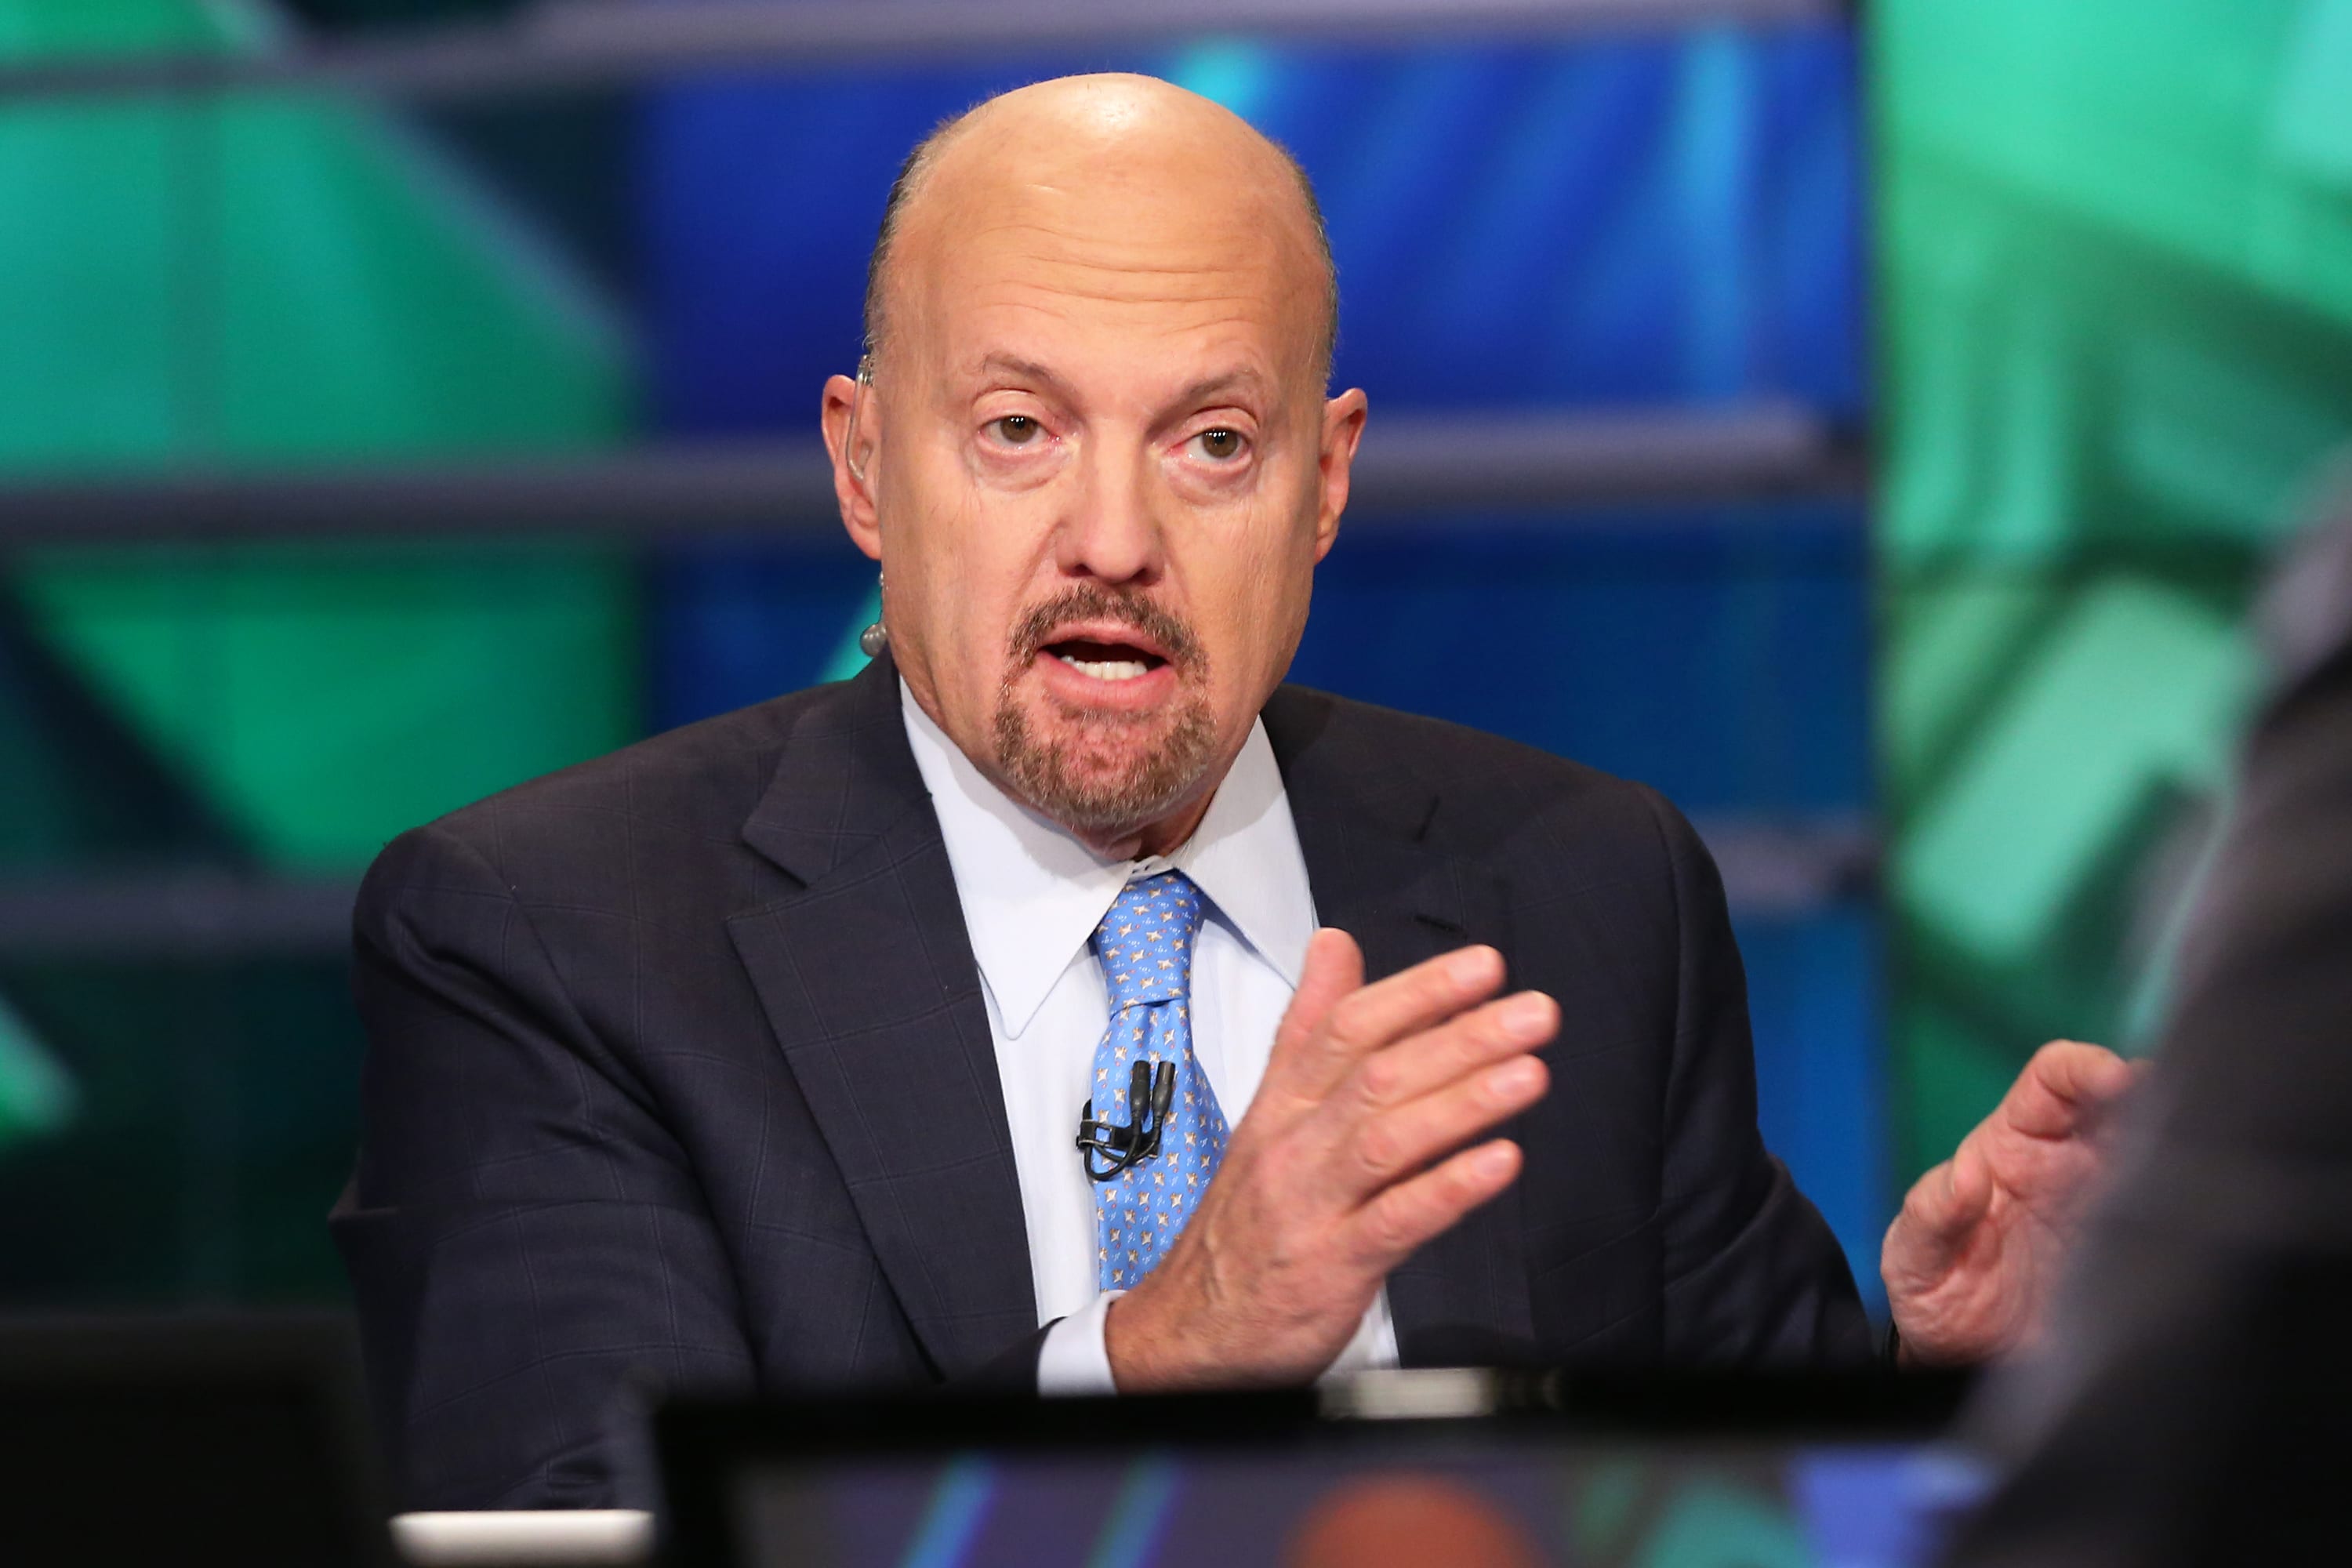 Cramer, outspoken about Tesla, prepared to purchase his spouse a Mannequin X